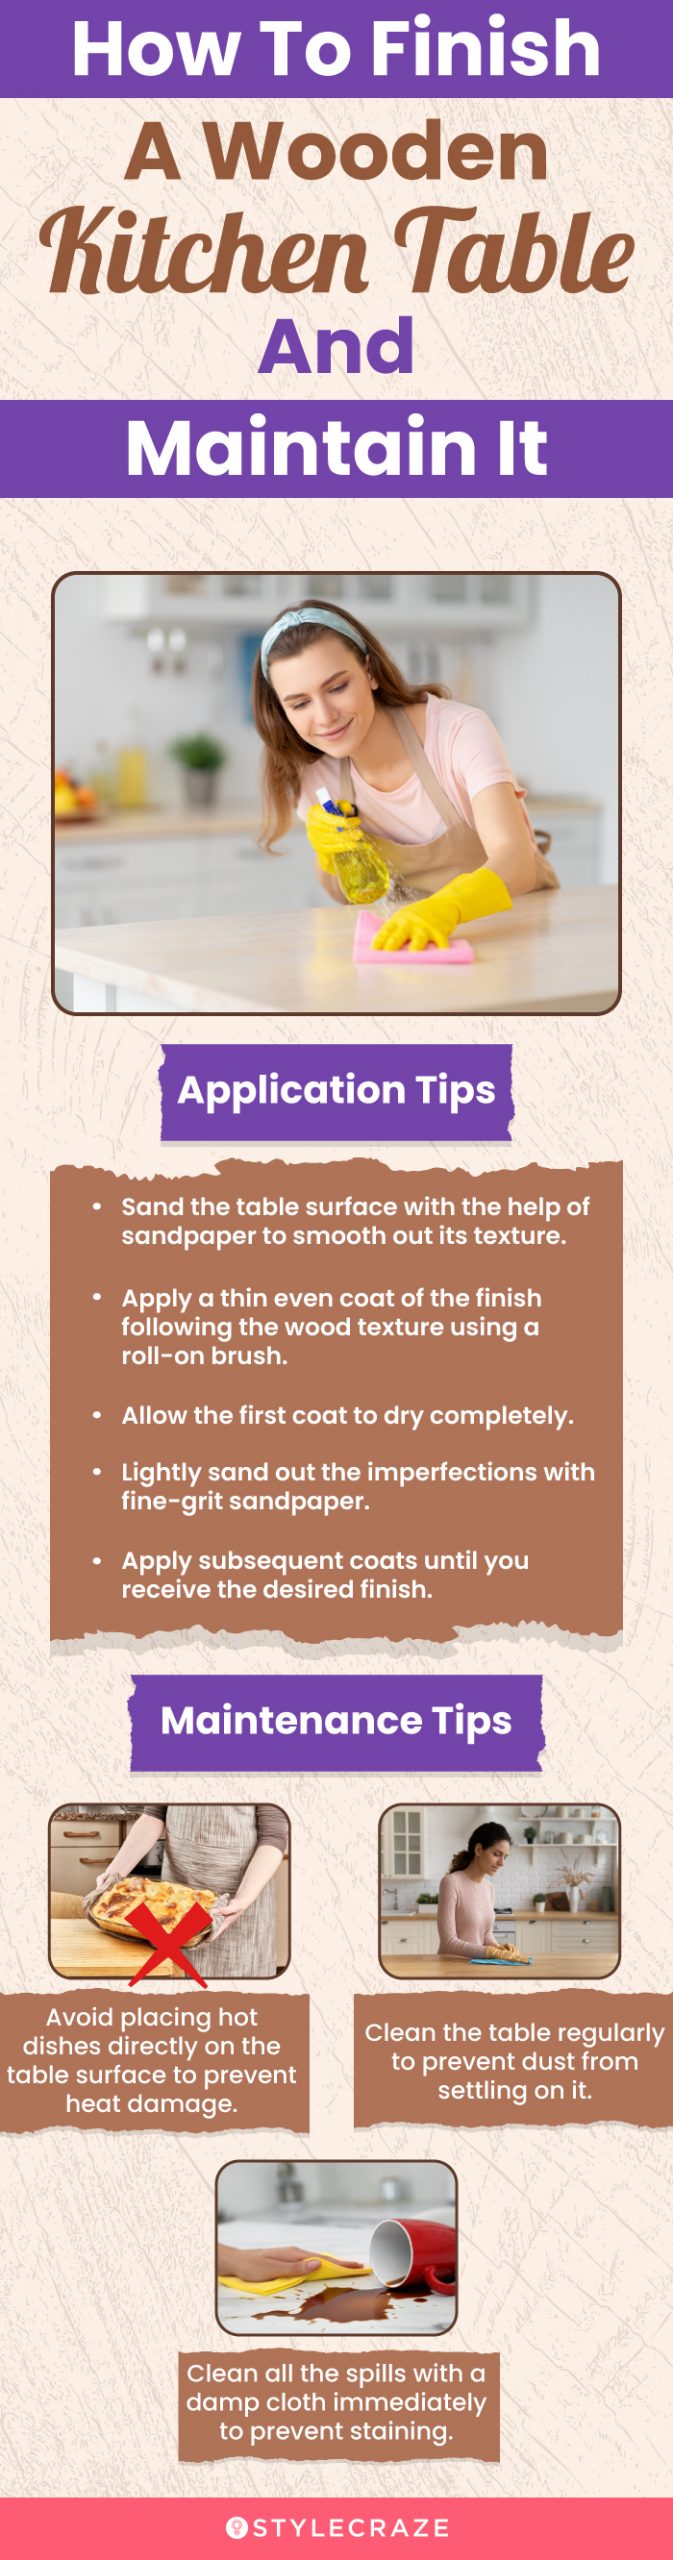 How To Finish A Wooden Kitchen Table And Maintain It